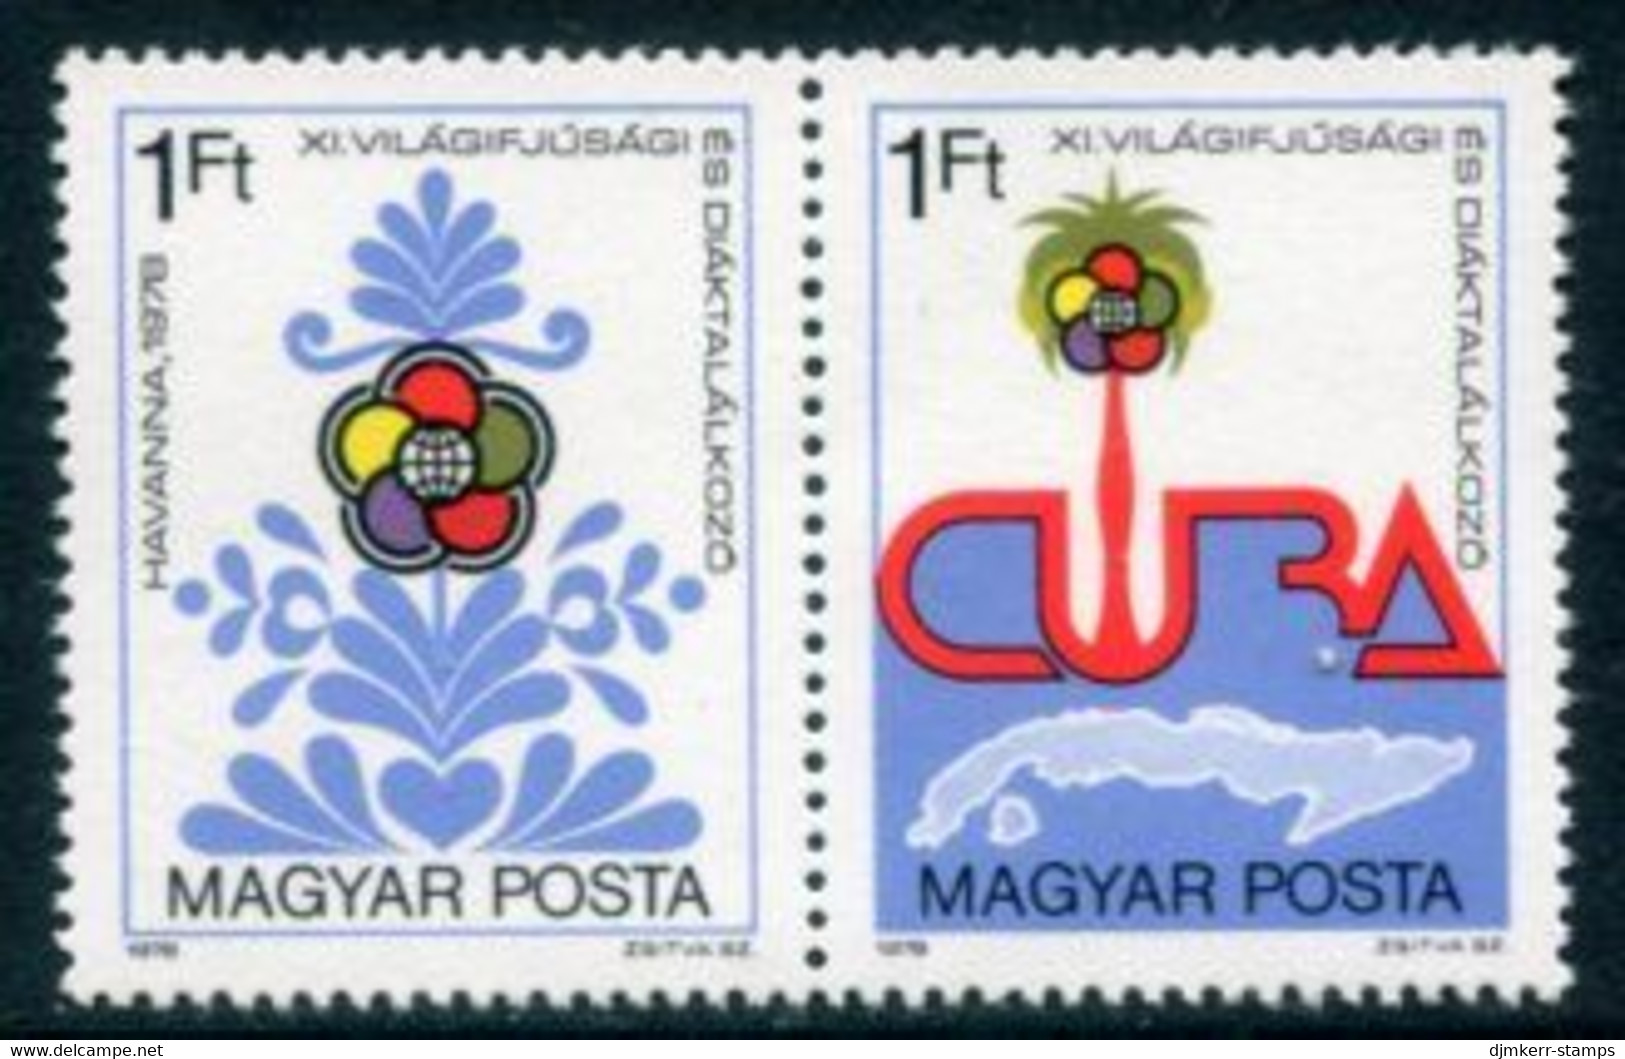 HUNGARY 1978 Youth And Student Games MNH /**.  Michel 3303-04 - Ungebraucht